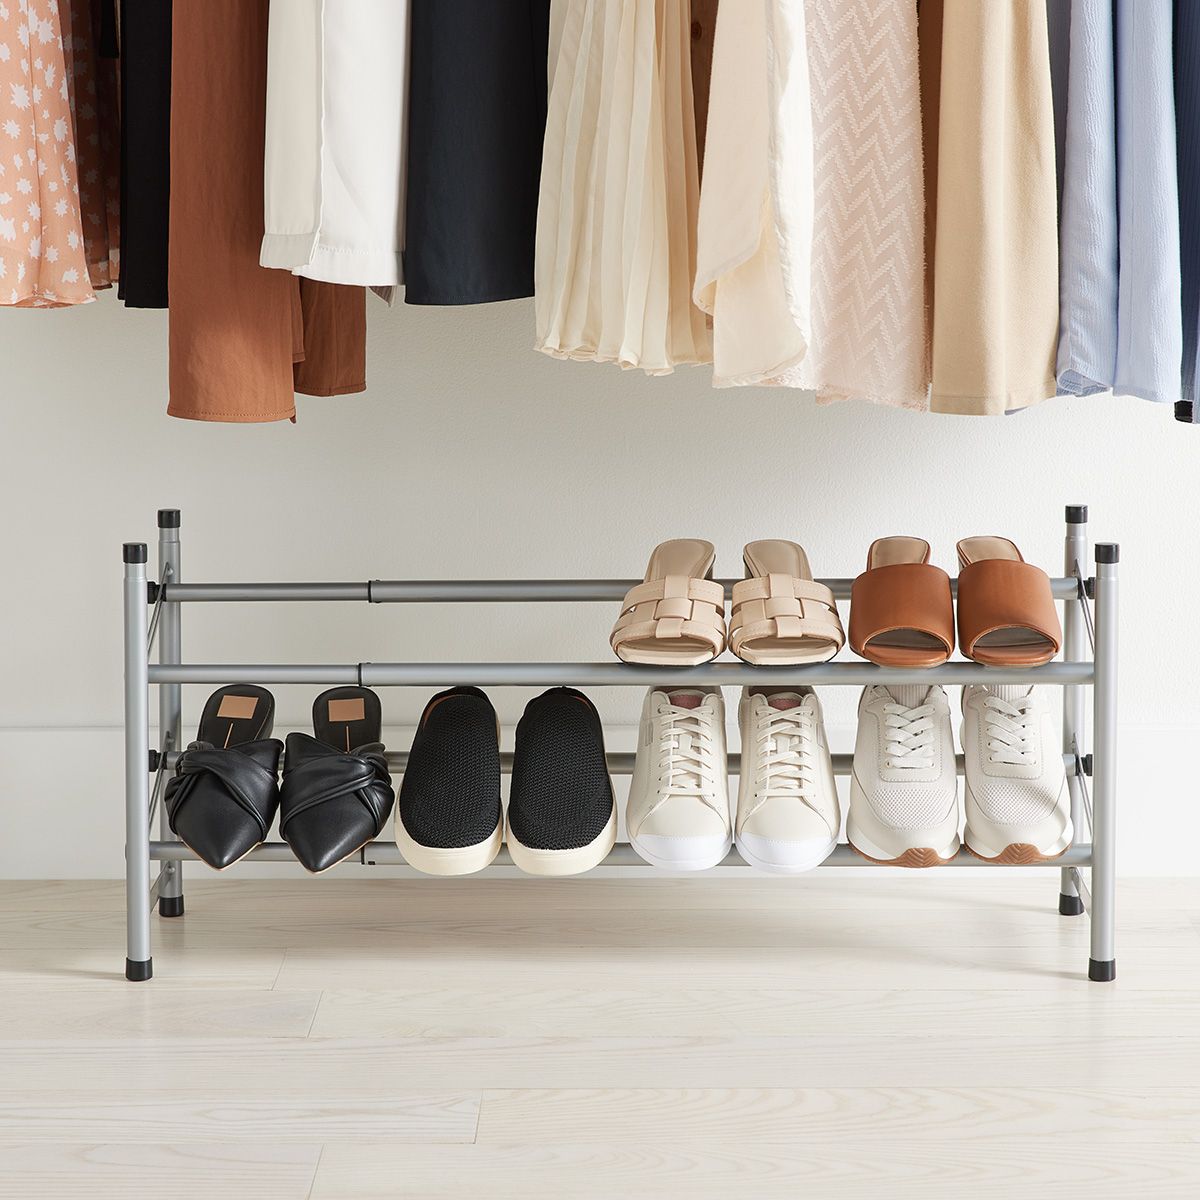 Platinum 2 Tier Adjustable Shoe Rack | The Container Store Throughout 2 Tier Adjustable Wardrobes (View 7 of 20)